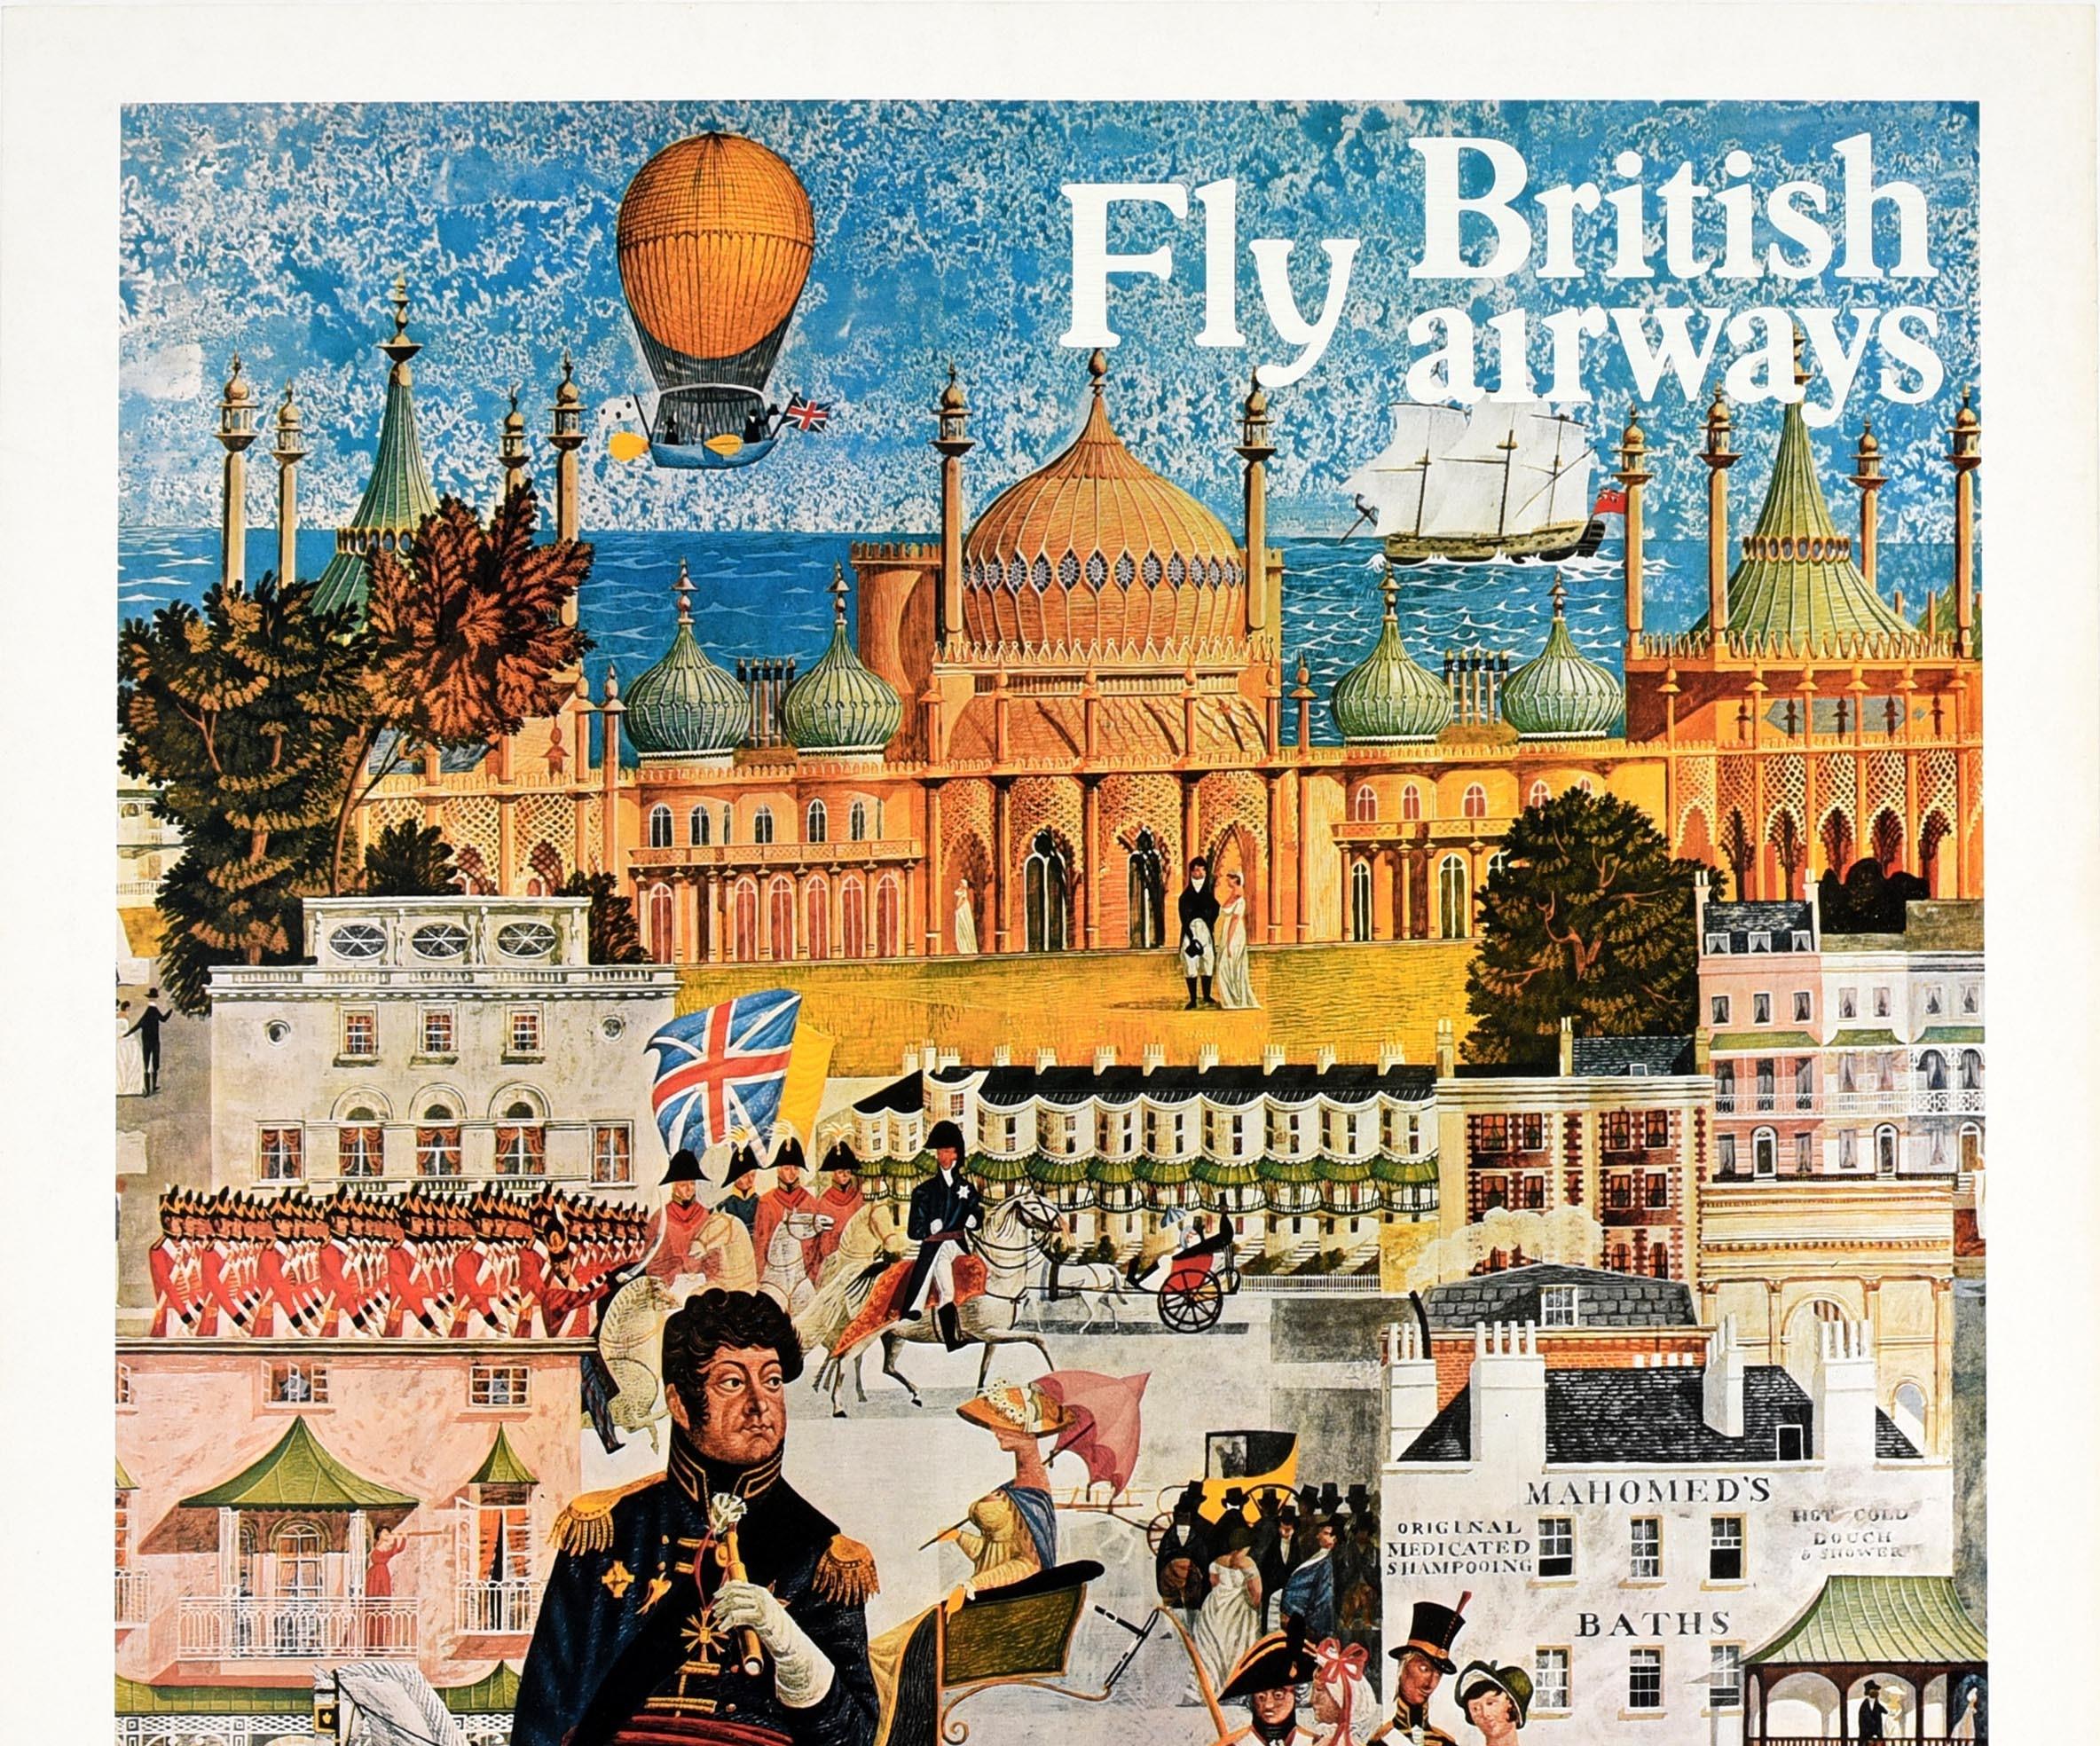 Original vintage travel poster - Britain Land of History fly British Airways Impressive examples of graceful Regency architecture (1810-1820) can be seen in many parts of Britain. This is an artist's impression of Brighton East Sussex in Regency